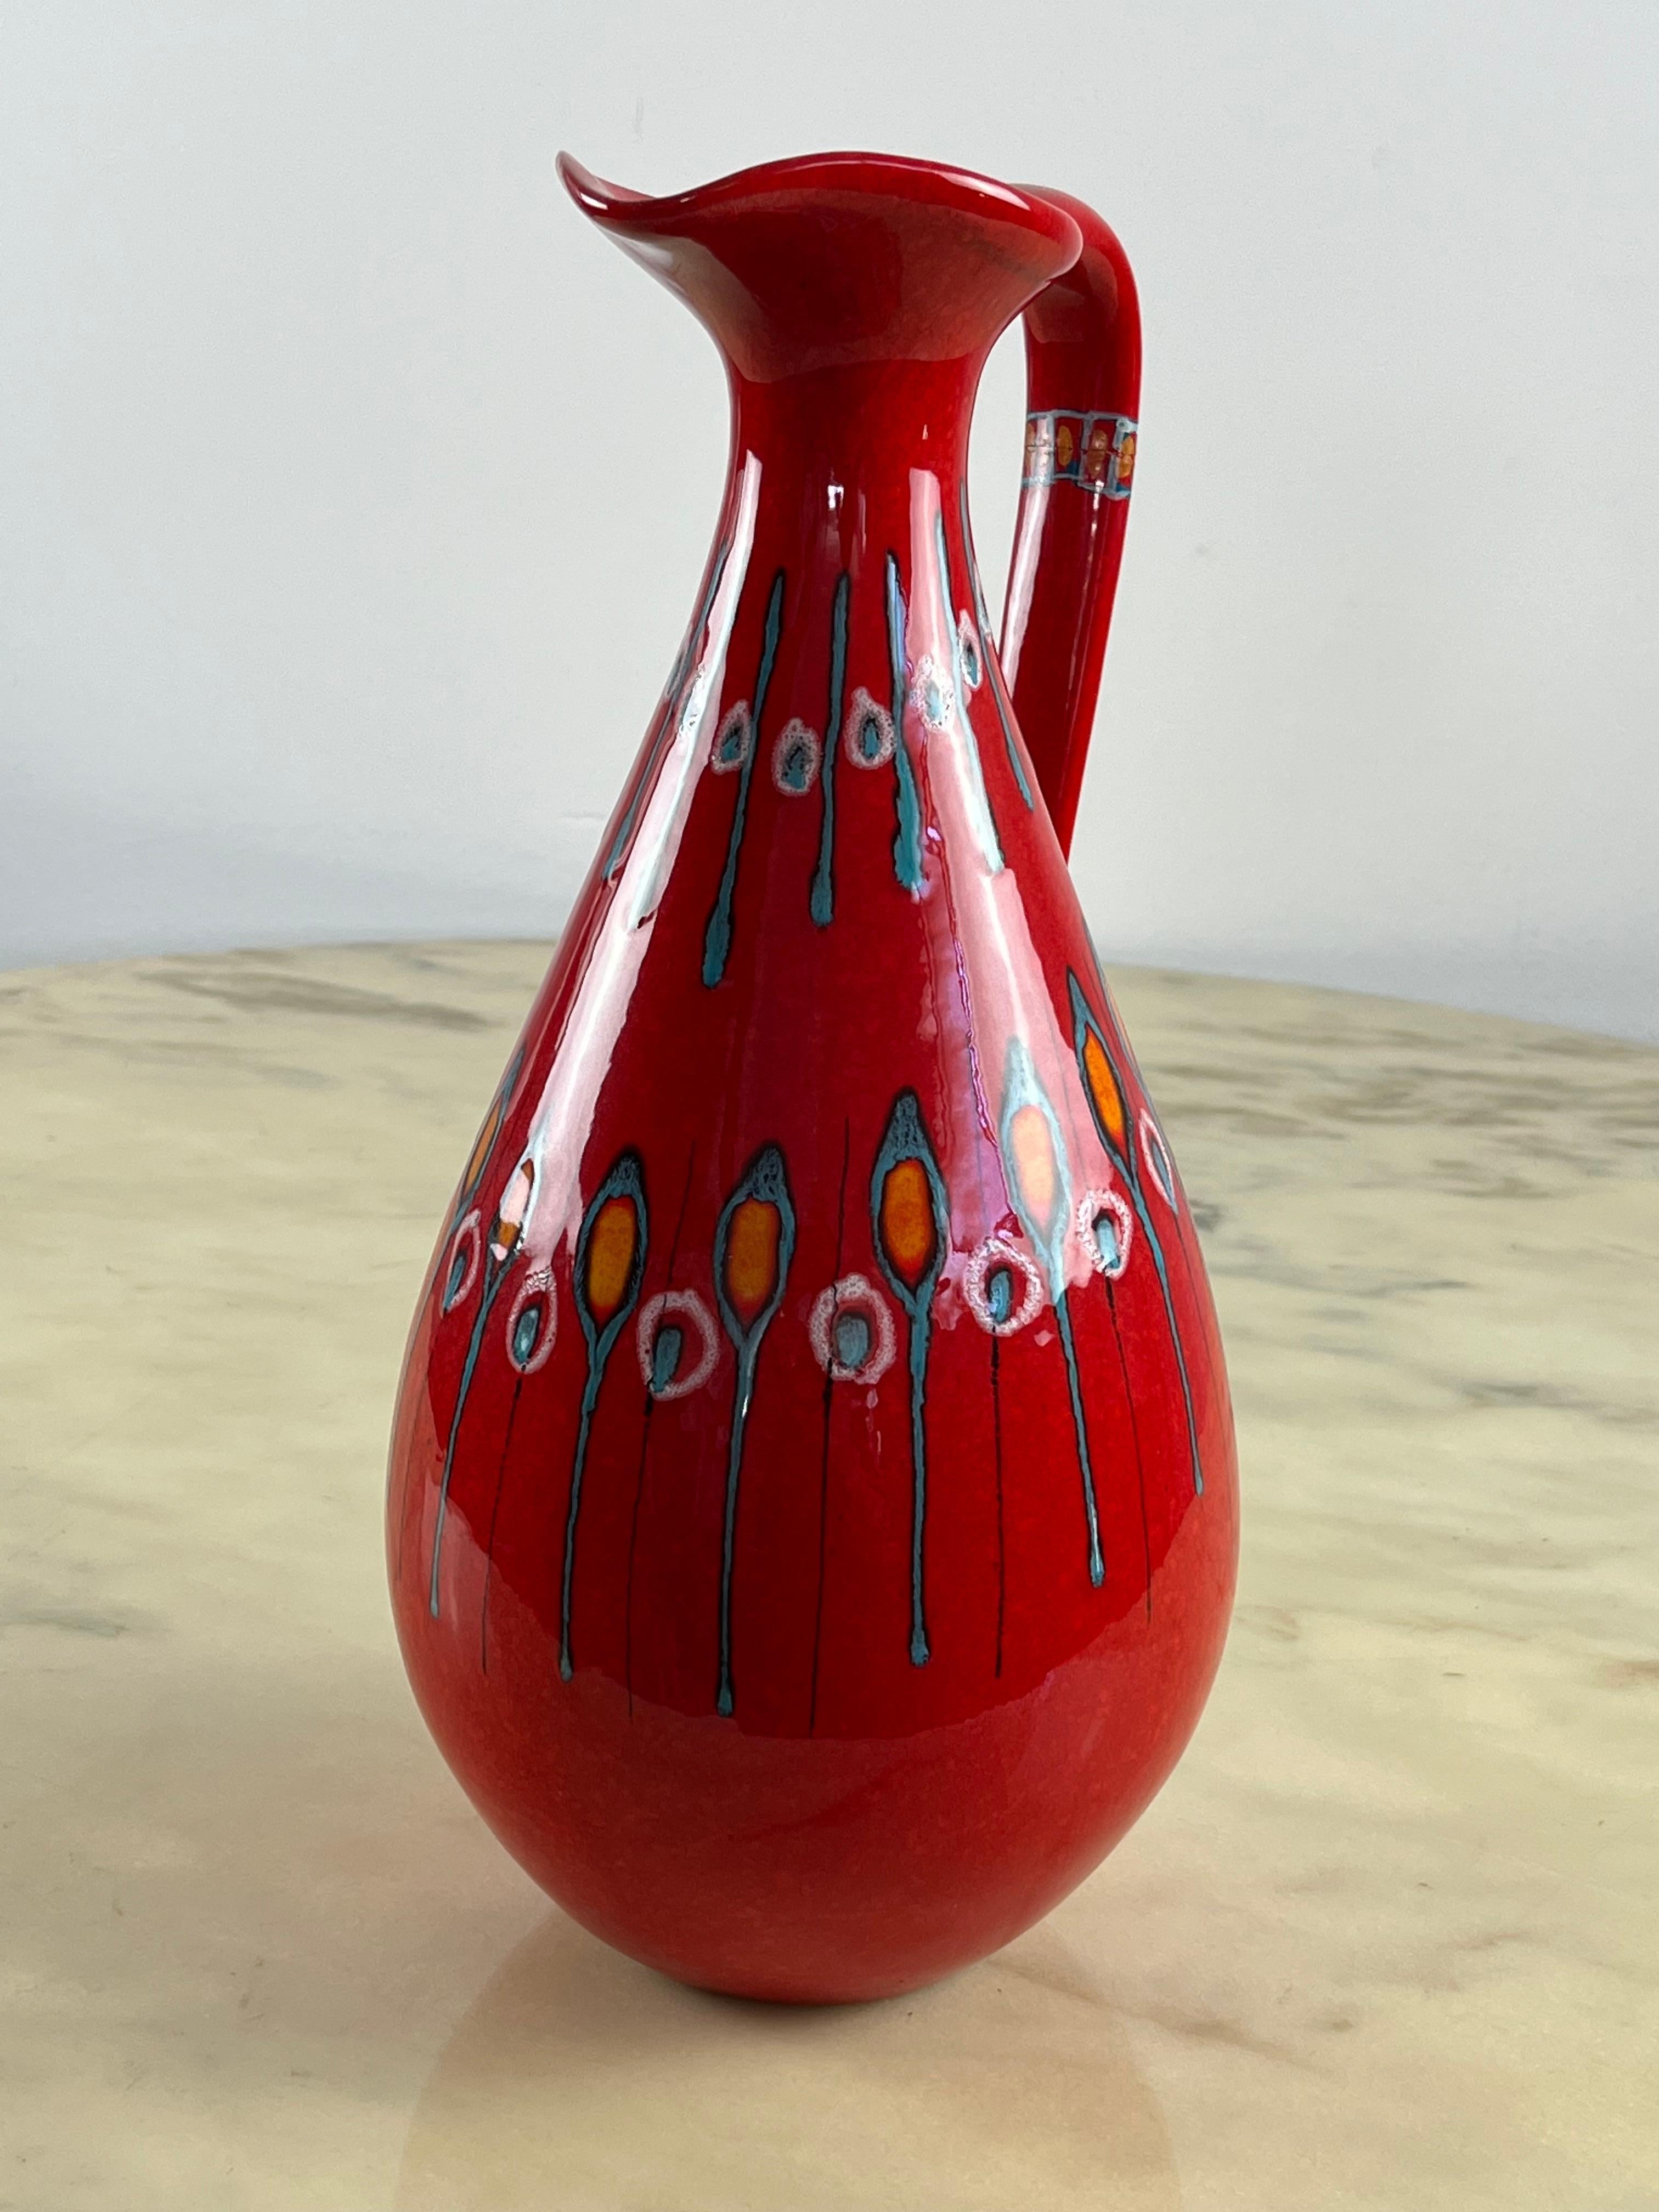 Giovanni Bertoncello's glazed ceramic jug. Founded in 1956 in Schiavon, in the province of Vicenza by the partners Lini, Marco Pizzato and Giovanni Bertoncello, with the name of 